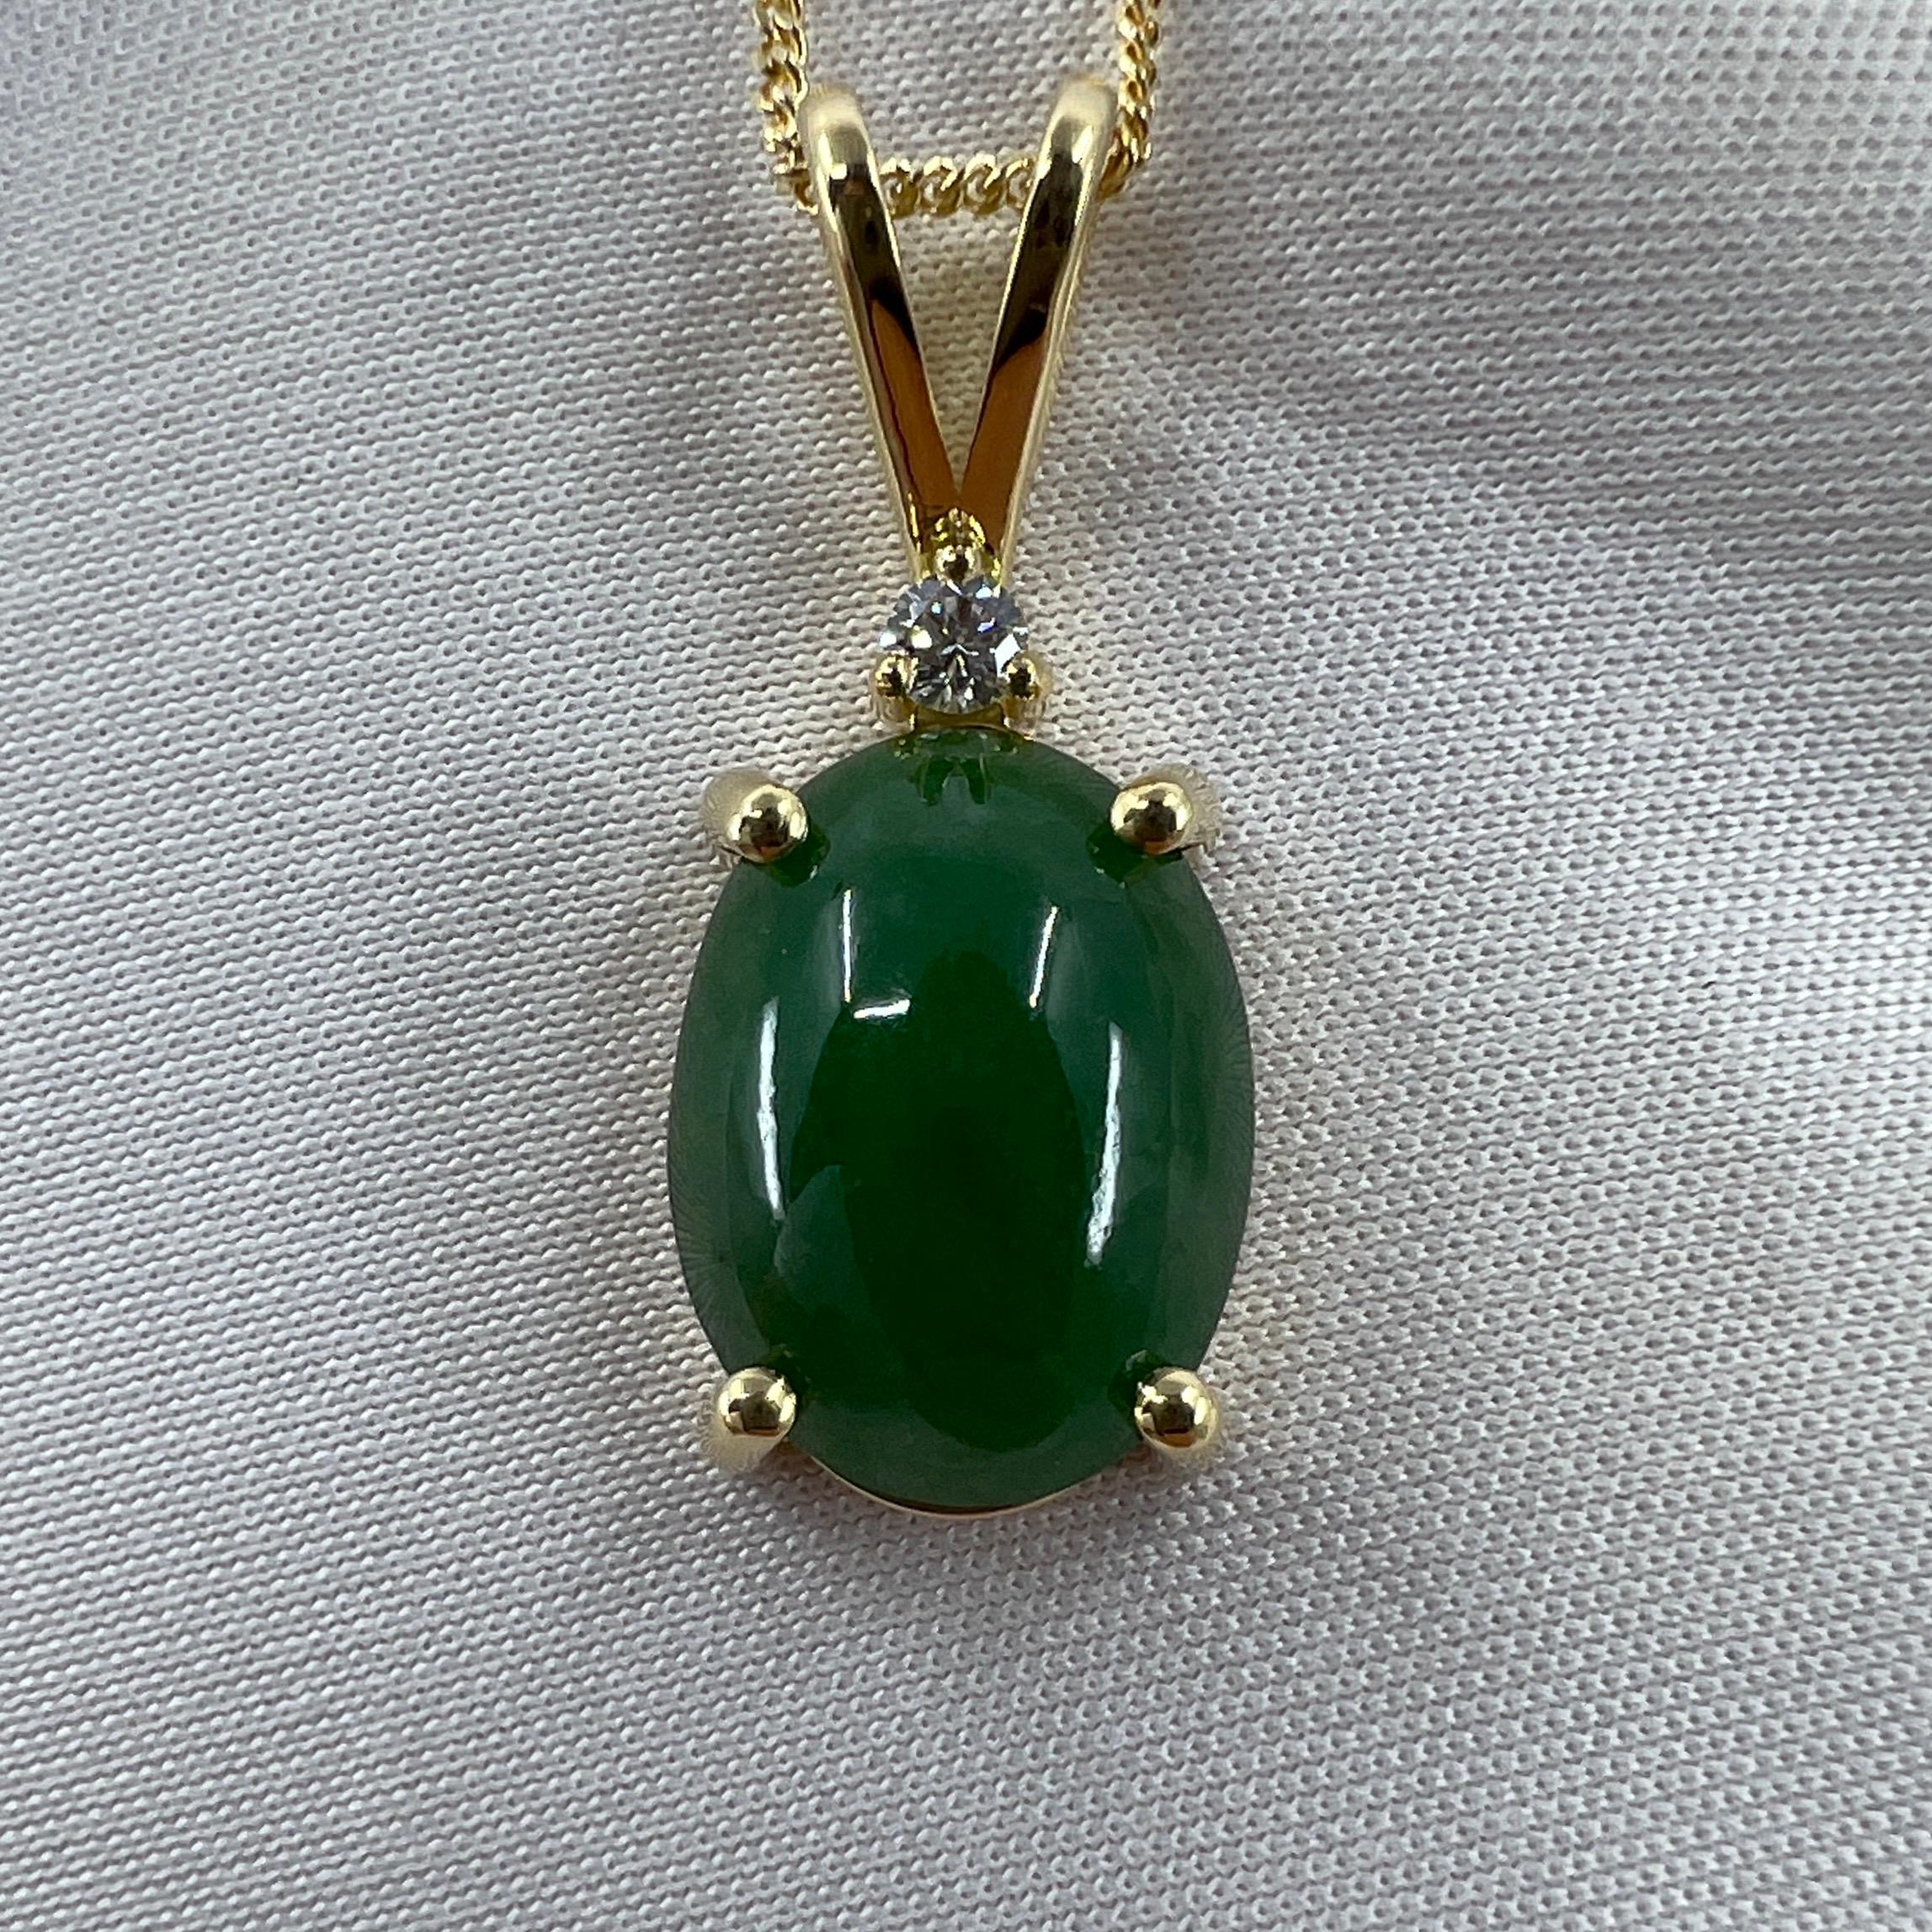 GIA Certified 4.93ct Untreated Jadeite Jade A-Grade Apple Green Pendant Necklace.

Beautiful untreated jadeite stone with a bright 'apple green' colour and excellent oval cabochon cut. 

It's very difficult to photograph cabochons due to how the